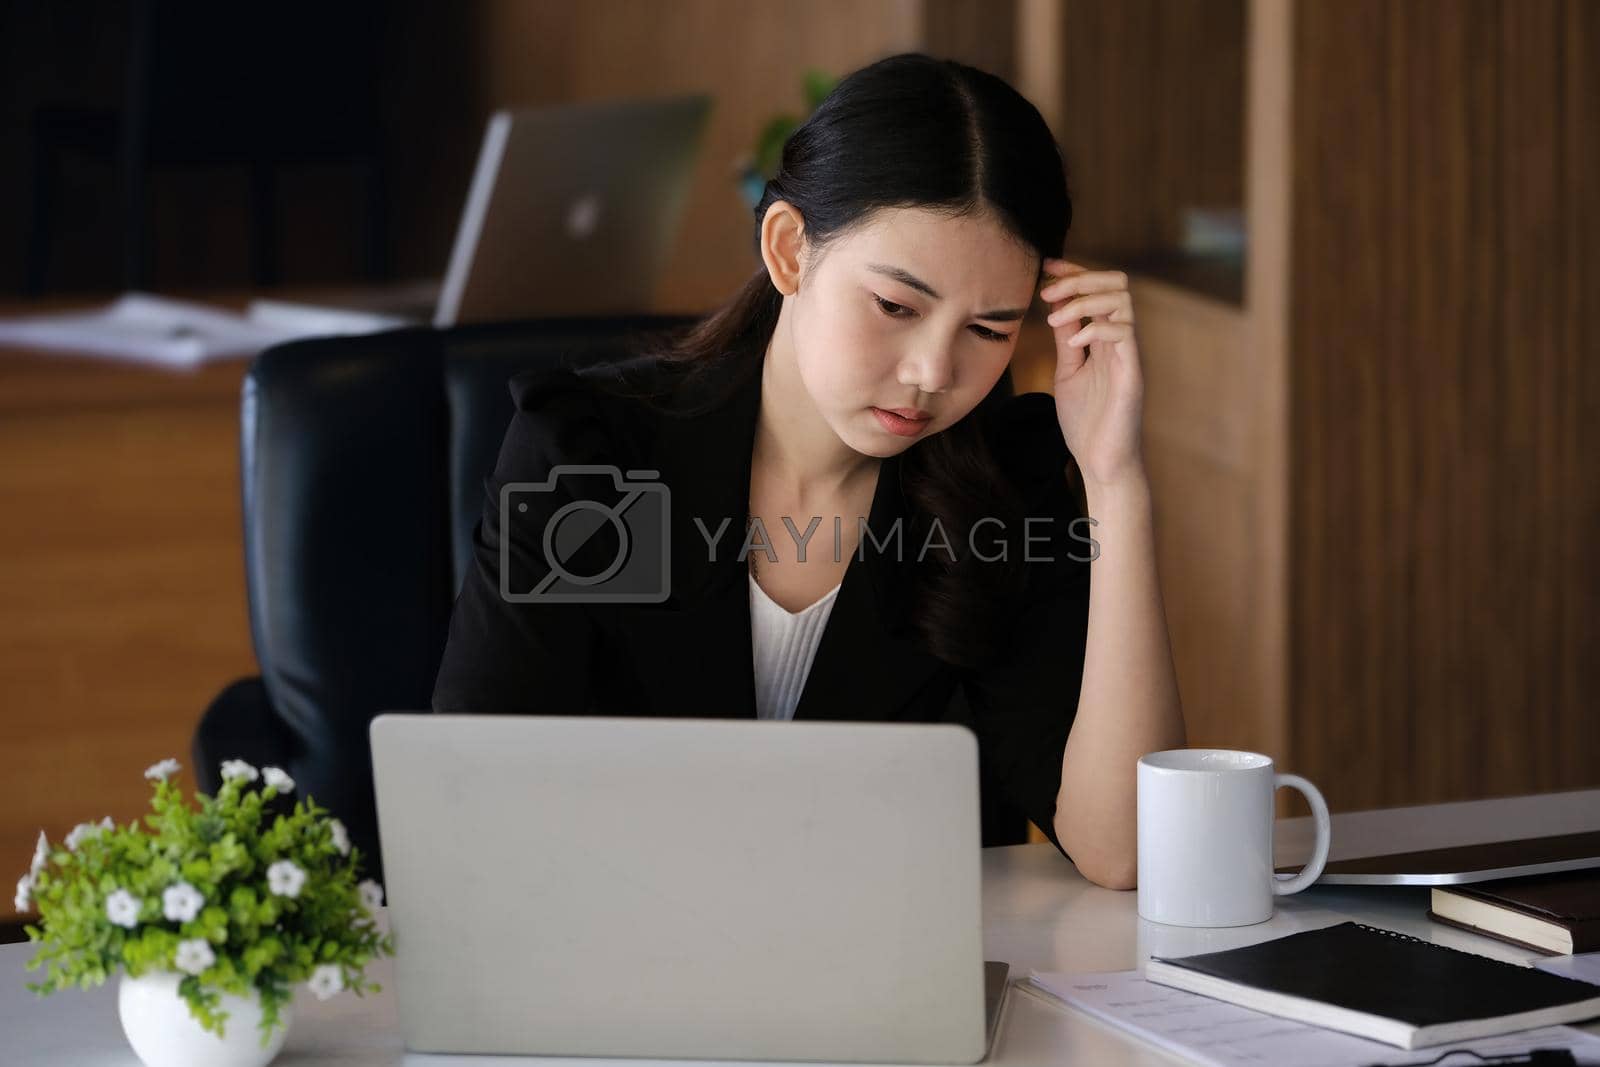 Royalty free image of Company employees show boredom from unfinished work using computer notebook, documents and tablets at work. by Manastrong